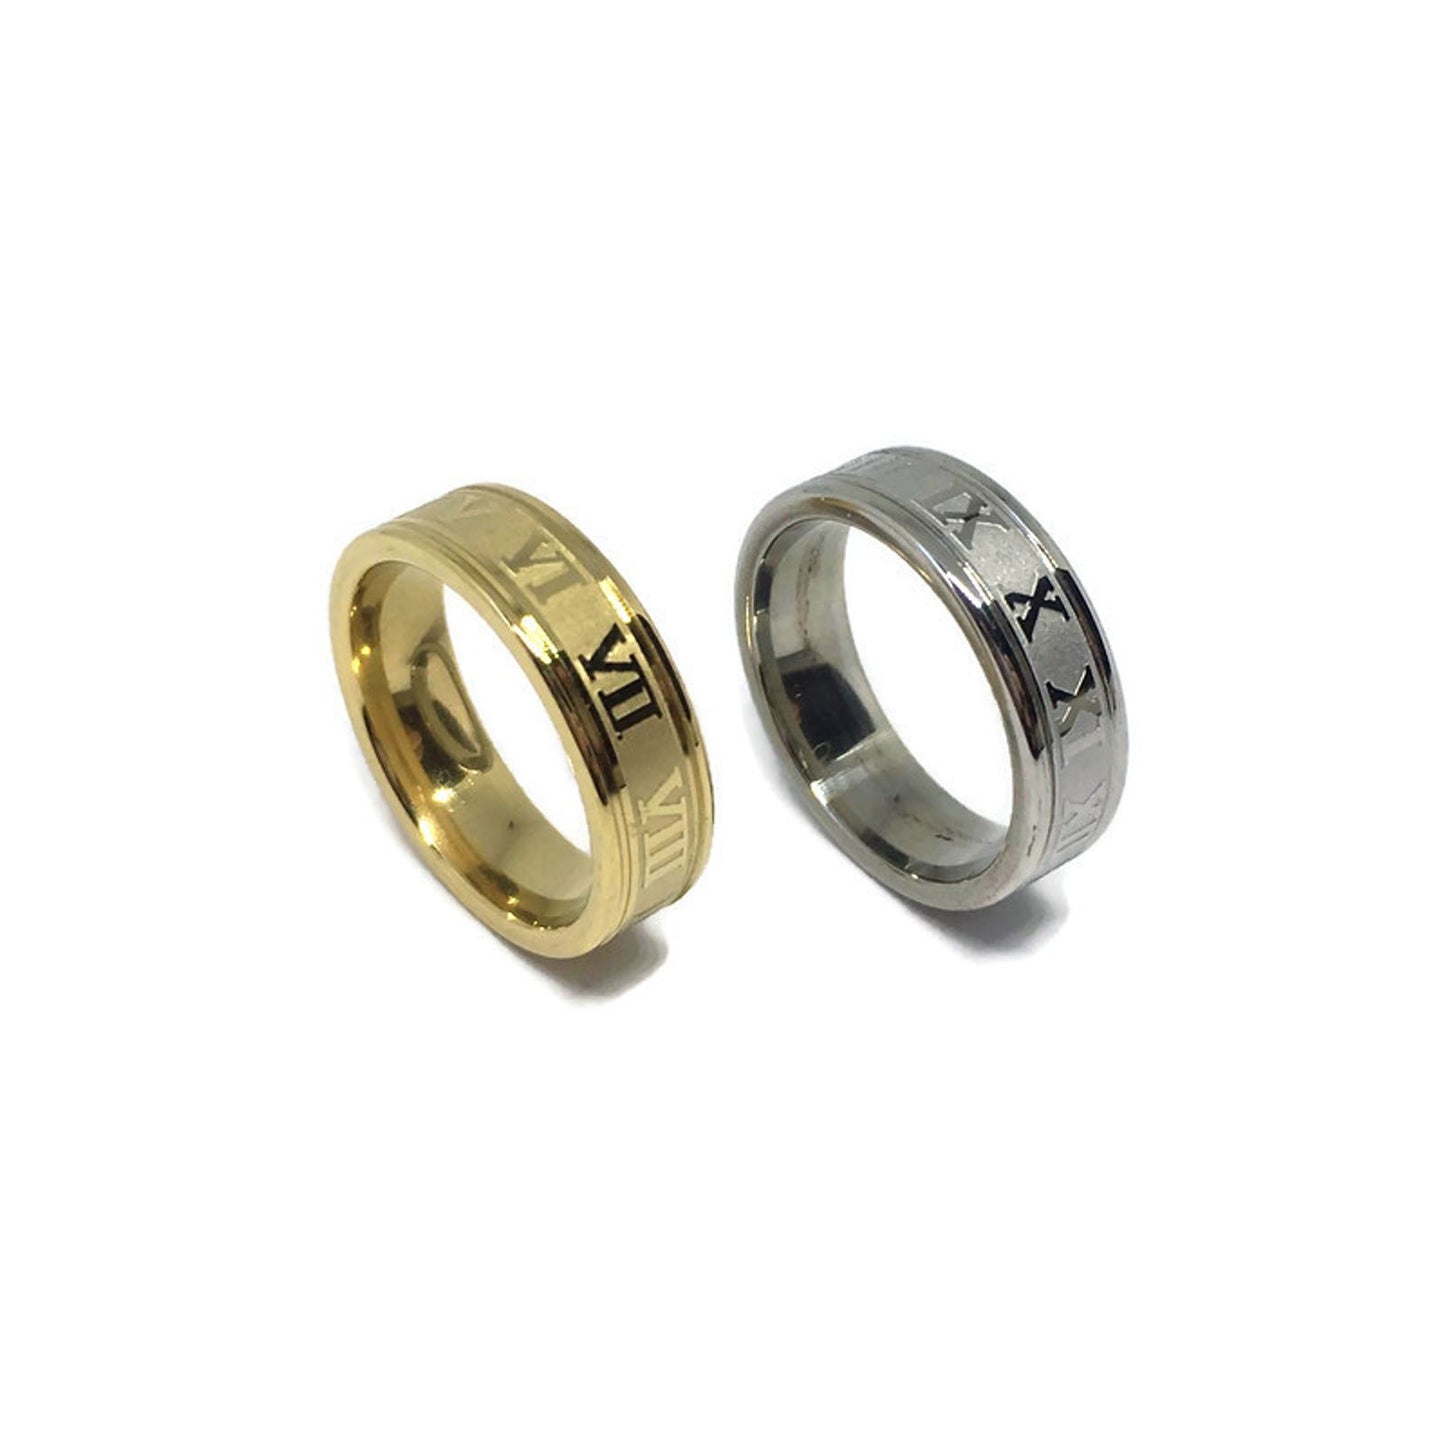 Roman Numerals Steel Band Ring